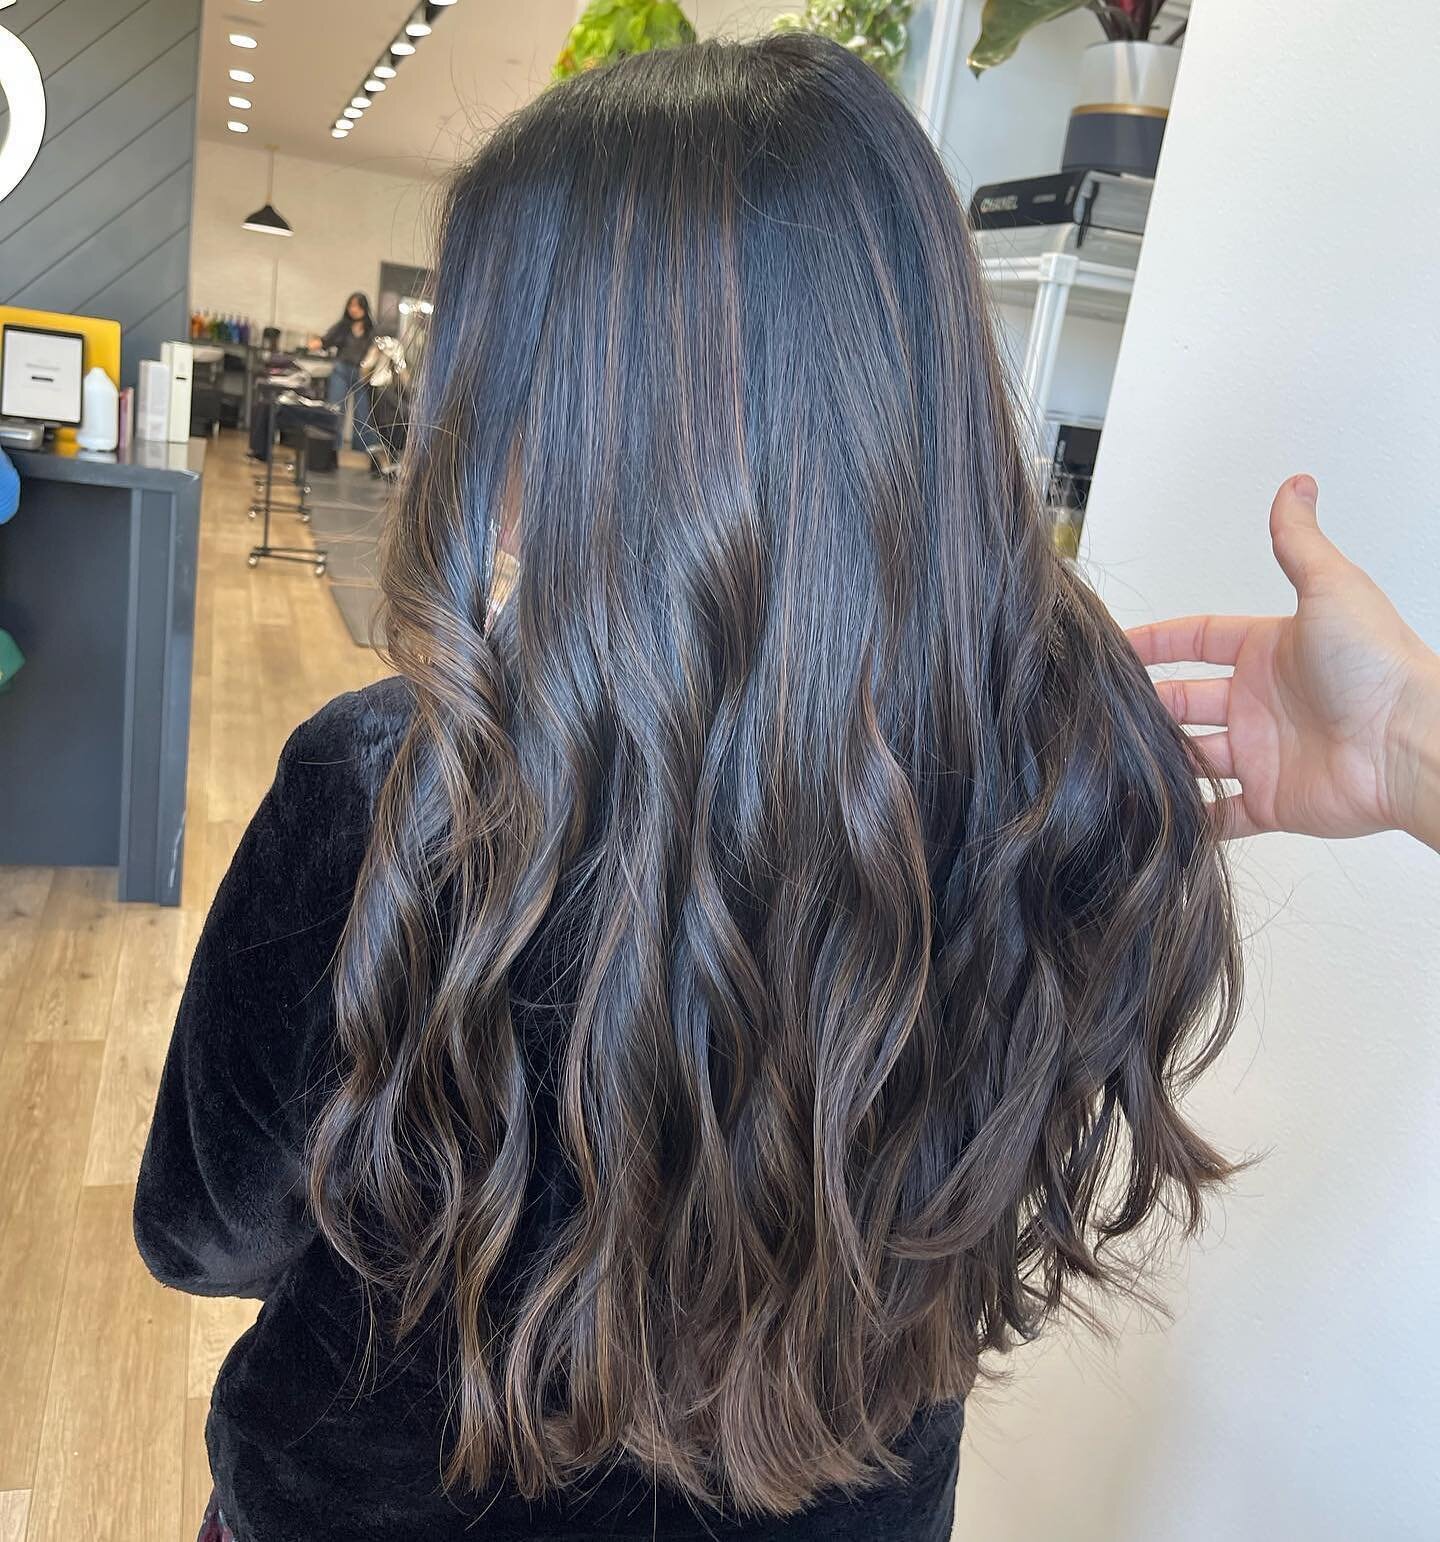 Hair by Gabriela &bull; @hairbygabrielag Soft dimensional brown for Melissa.🤎

This was our first maintenance toner appointment after her first highlight session. This was her first time EVER coloring her hair and we wanted to make sure to keep it l